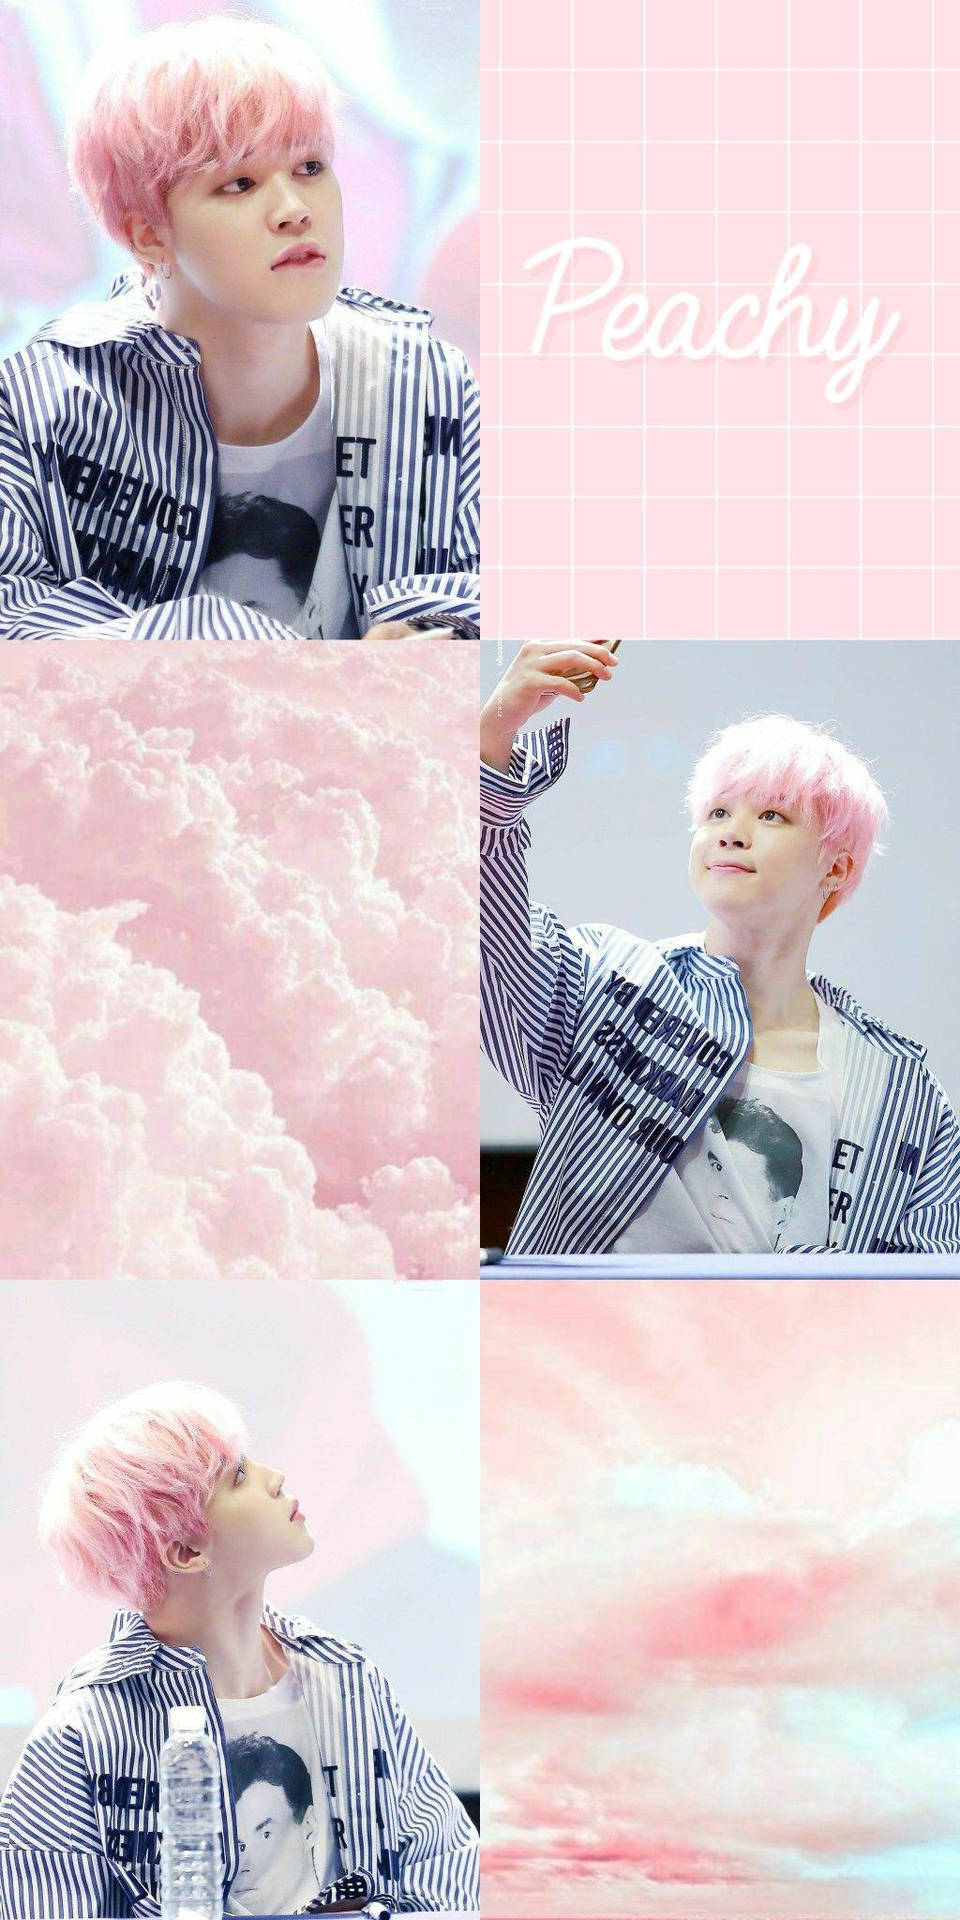 Peach And Stripes Jimin Aesthetic Wallpaper